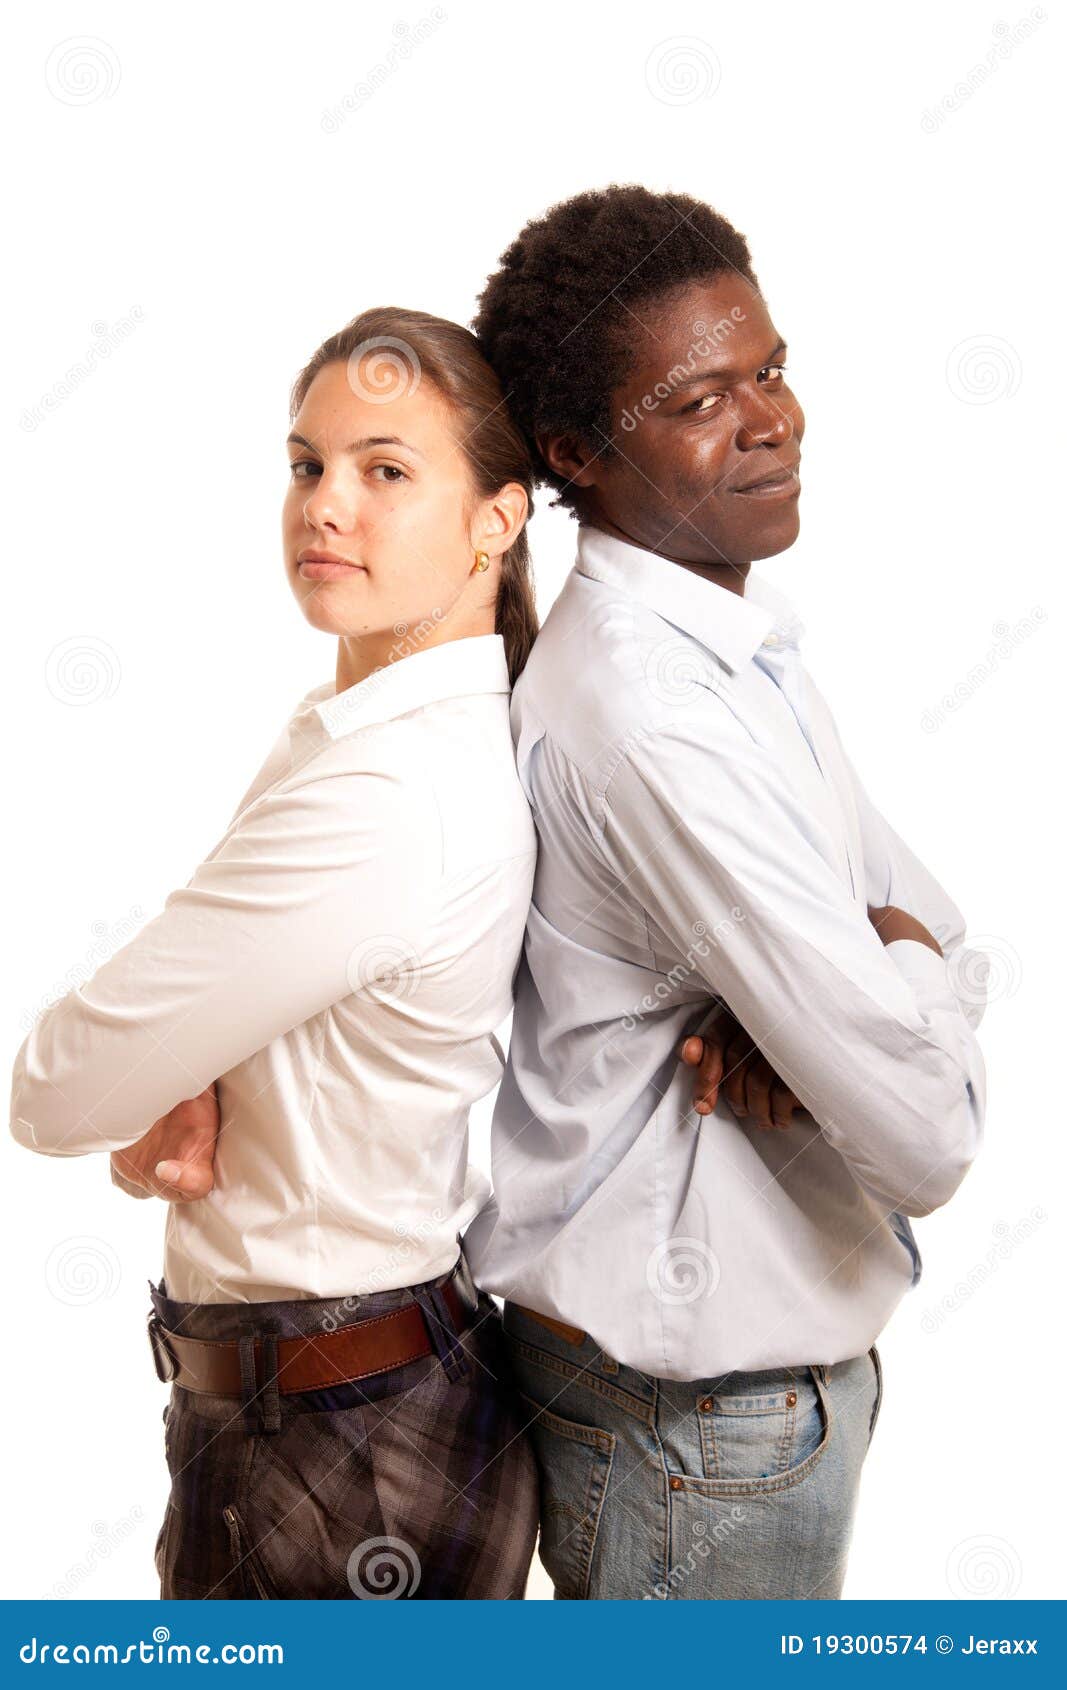 Team confident stock photo. Image of back, corporate - 19300574